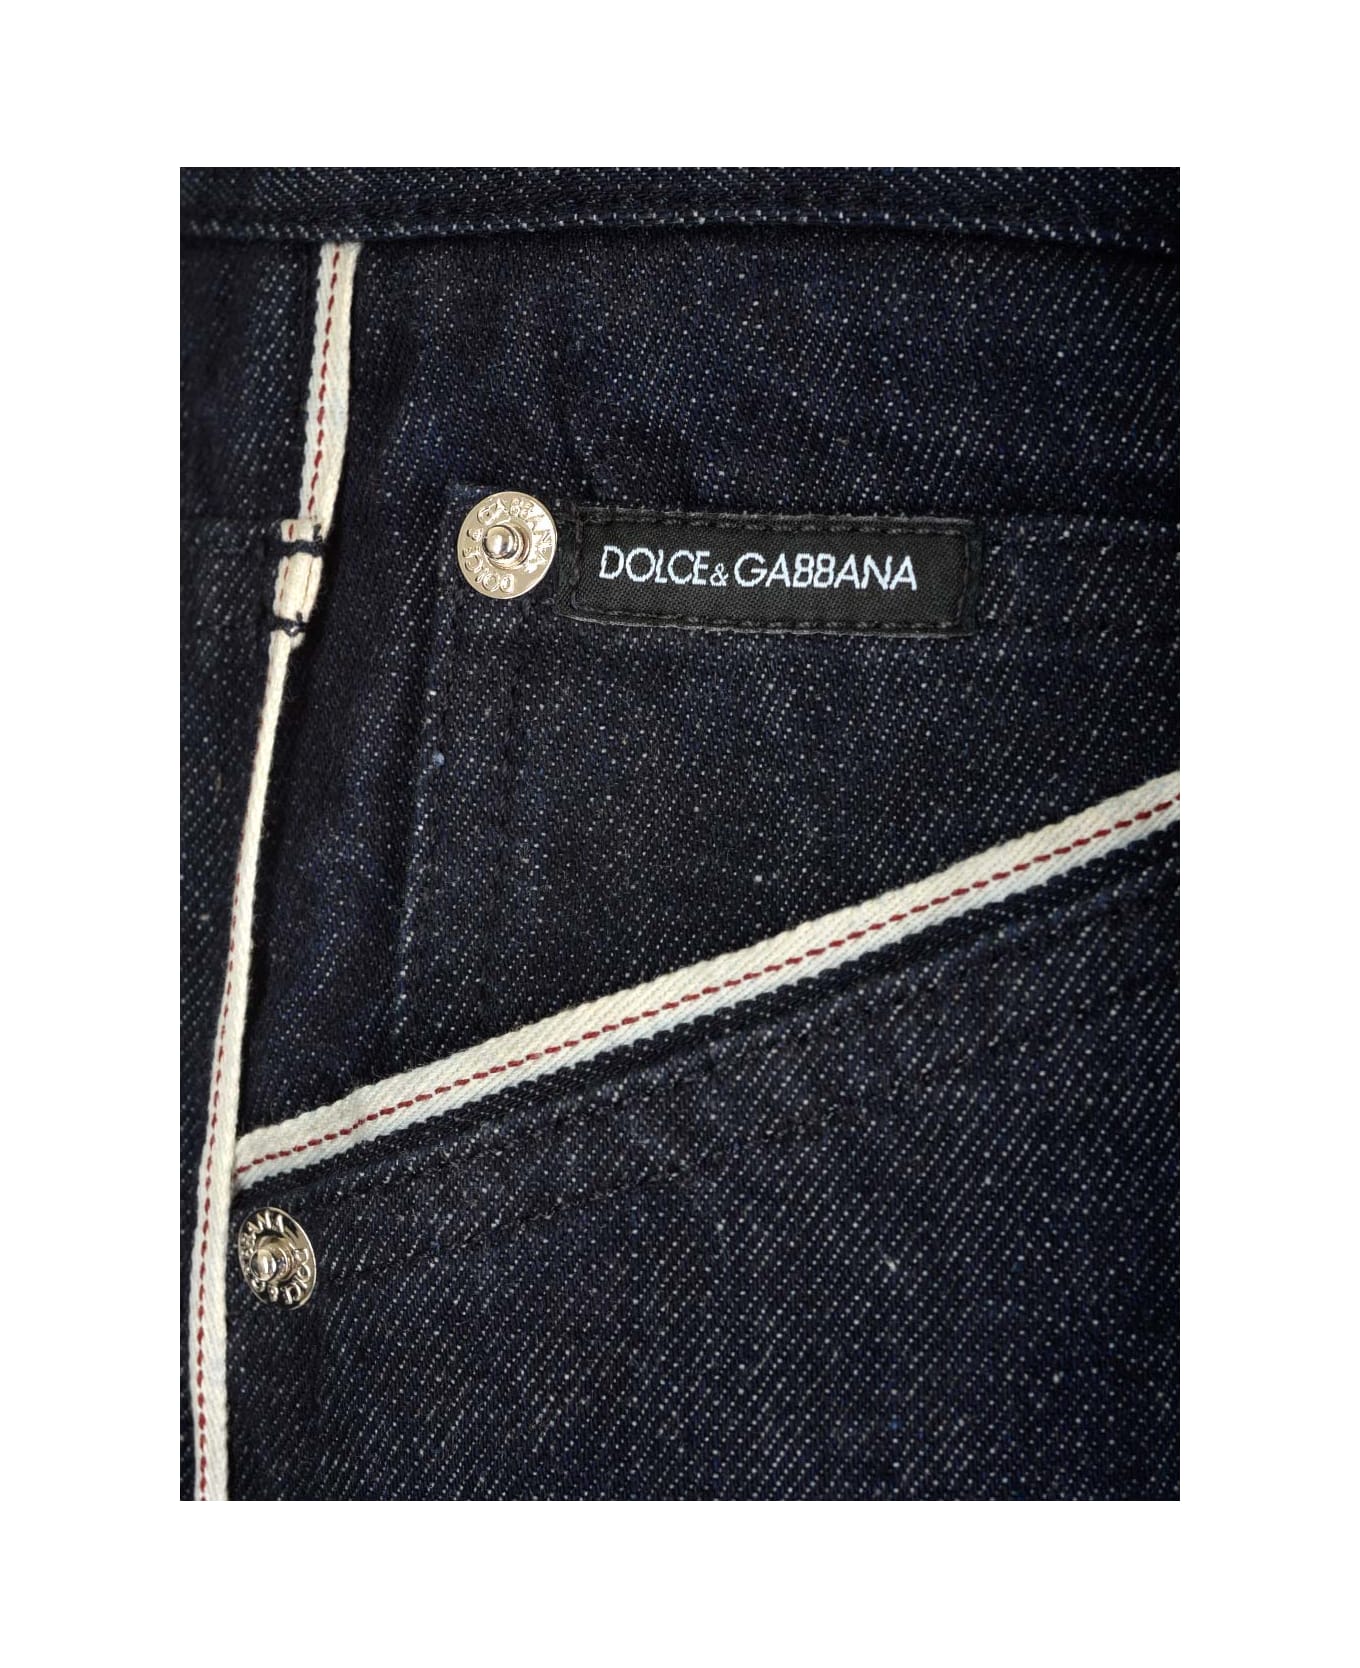 Dolce & Gabbana Contrasting Profiles Jeans